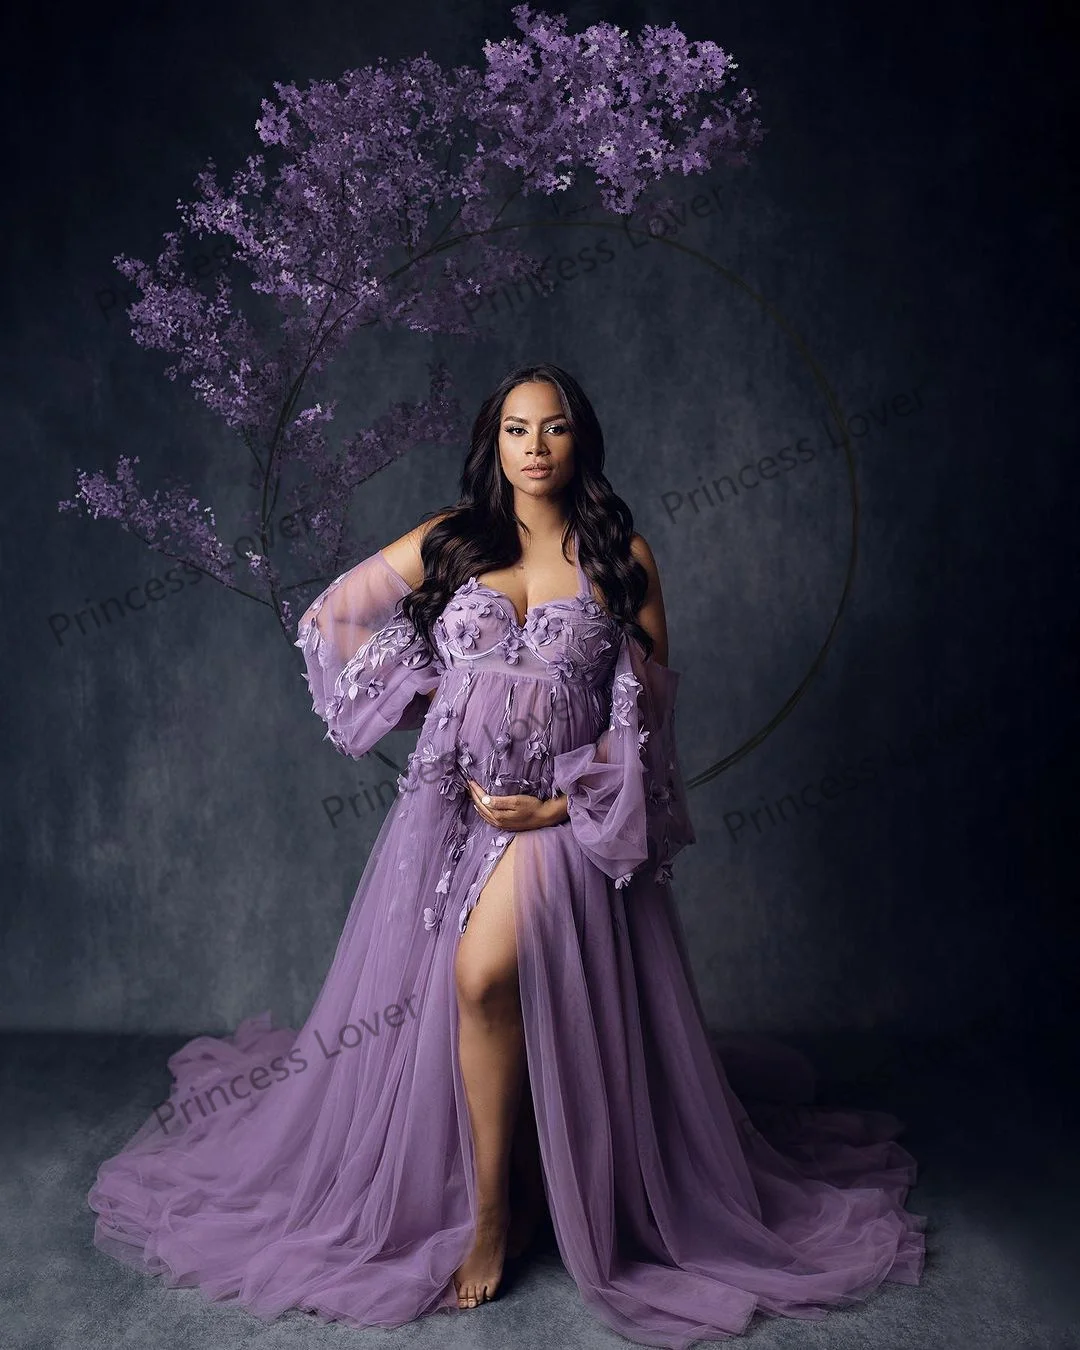 Fashion Lavender Prom Dresses Tulle Side Slit Pregnancy Photography Dressing Gown Puff Long Sleeves Appliqued Maternity Robes